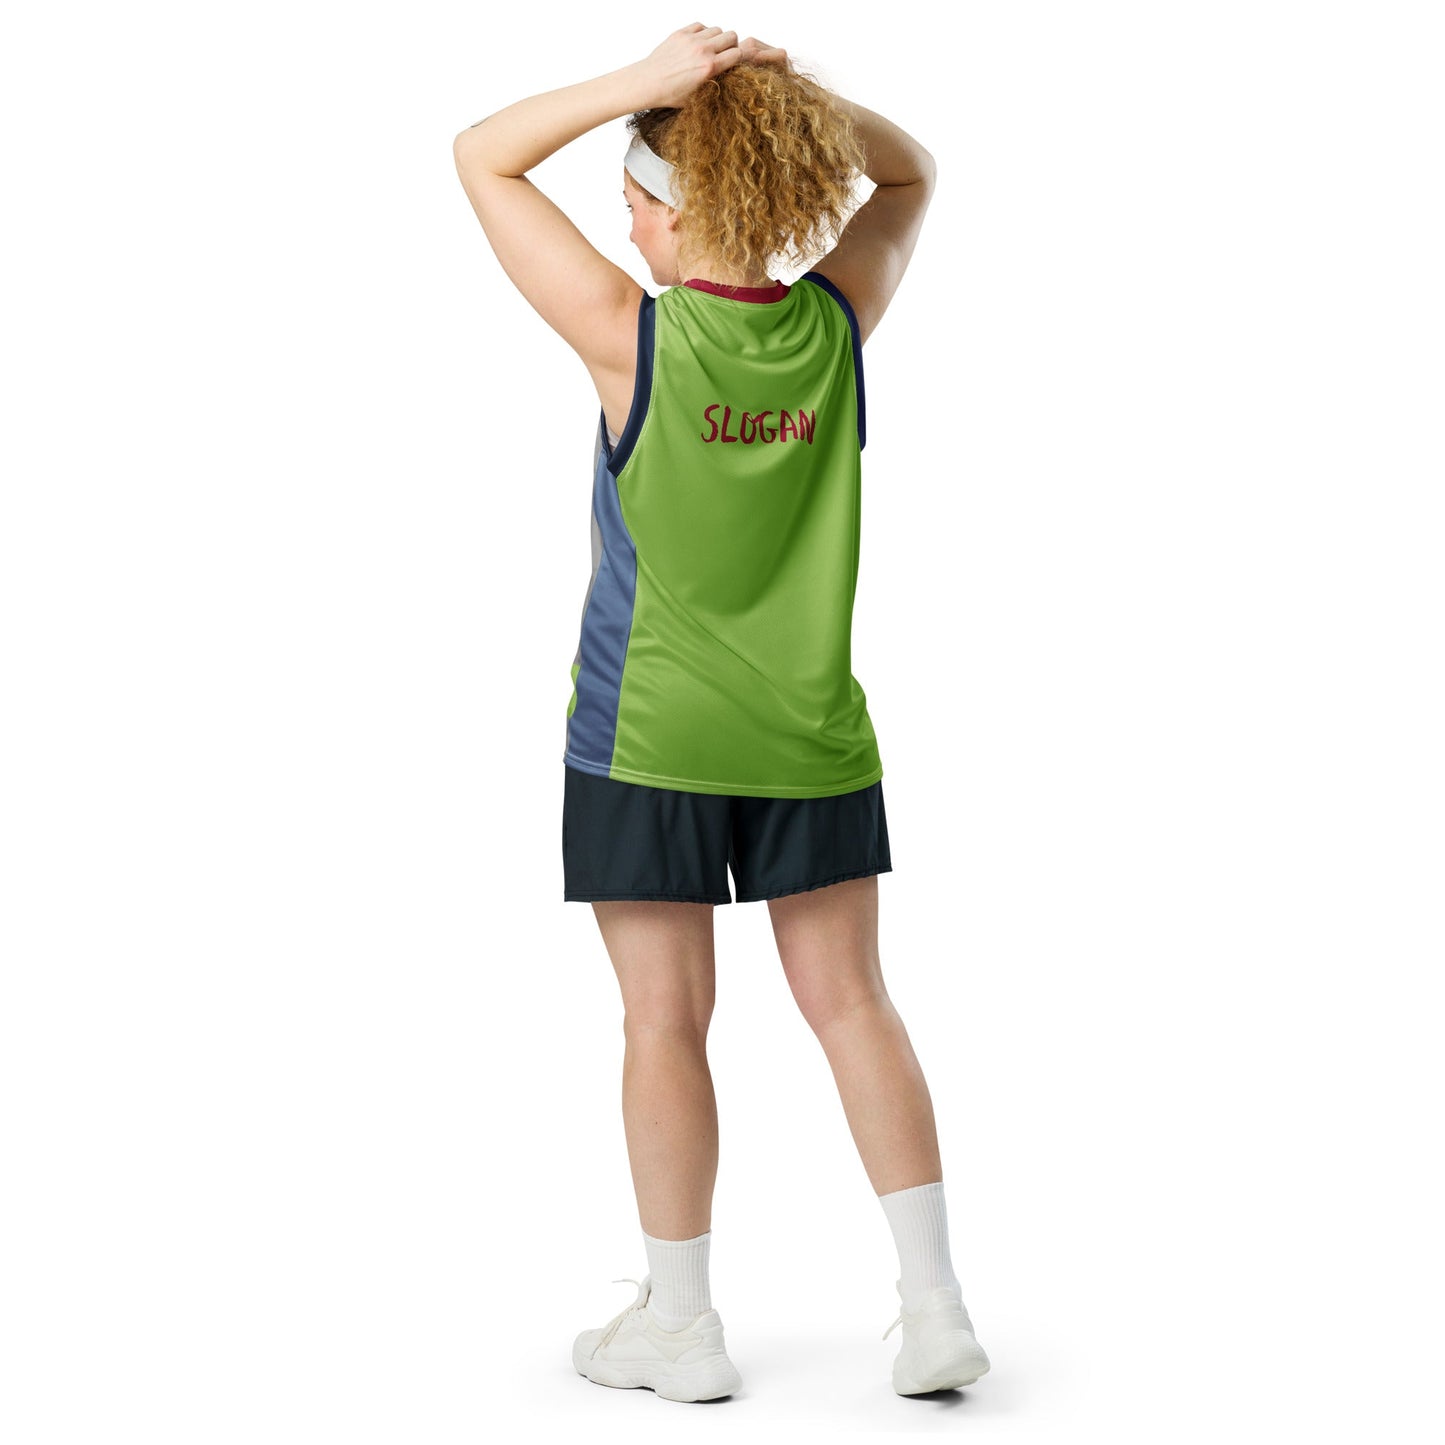 TIME OF VIBES - Recycled unisex basketball jersey Demo CORPORATE - €42.00